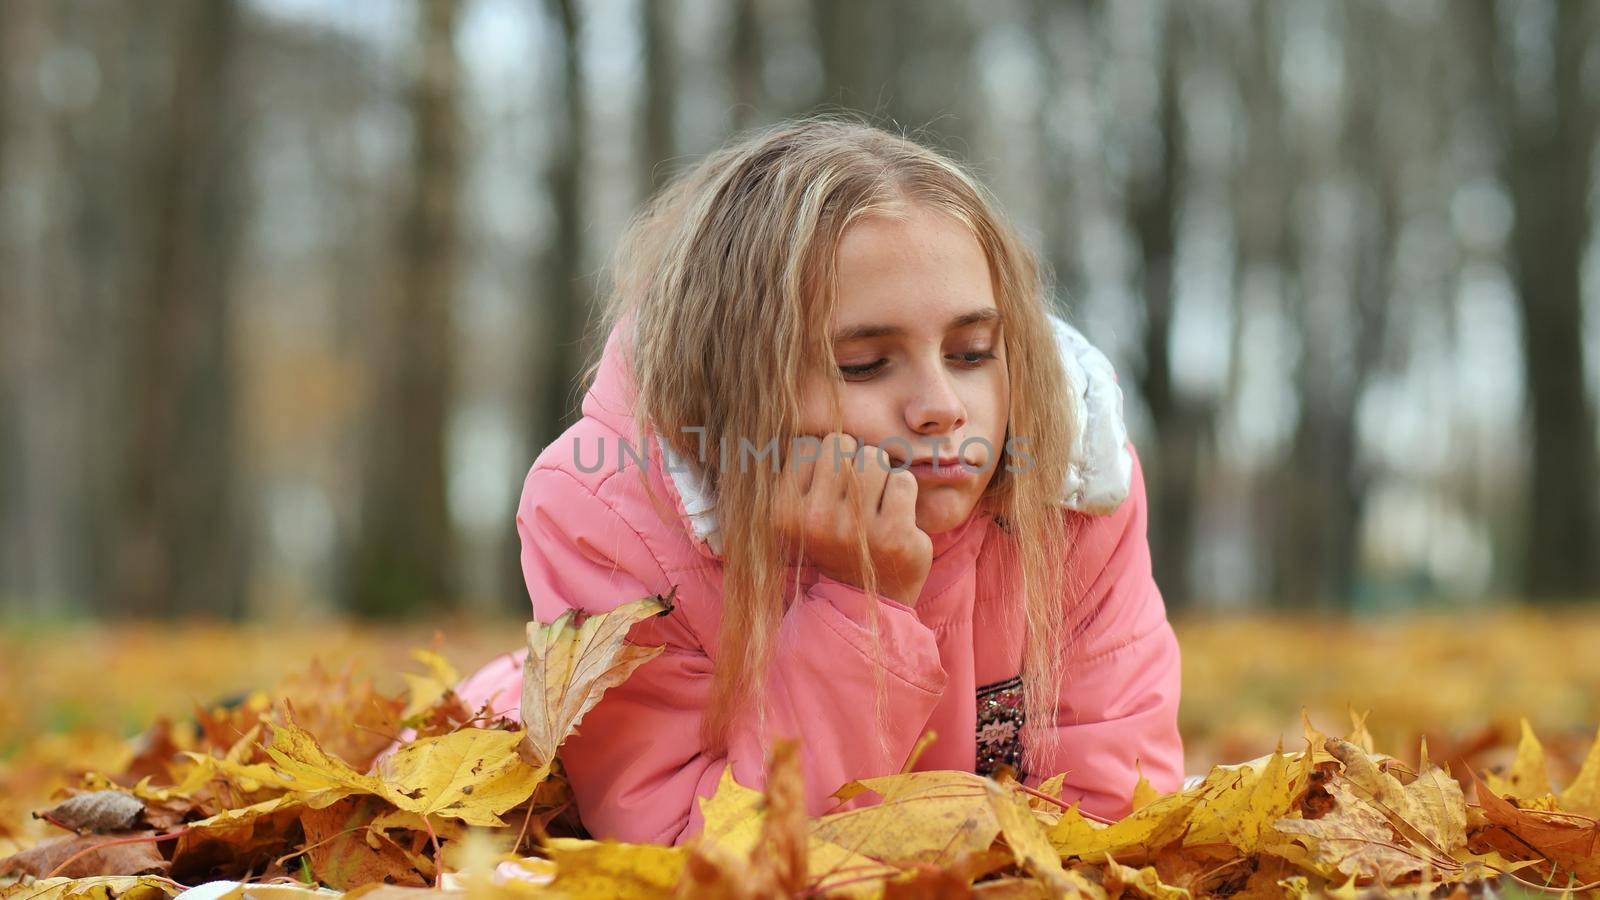 A little girl indifferently lies on the autumn foliage in a city park. by DovidPro